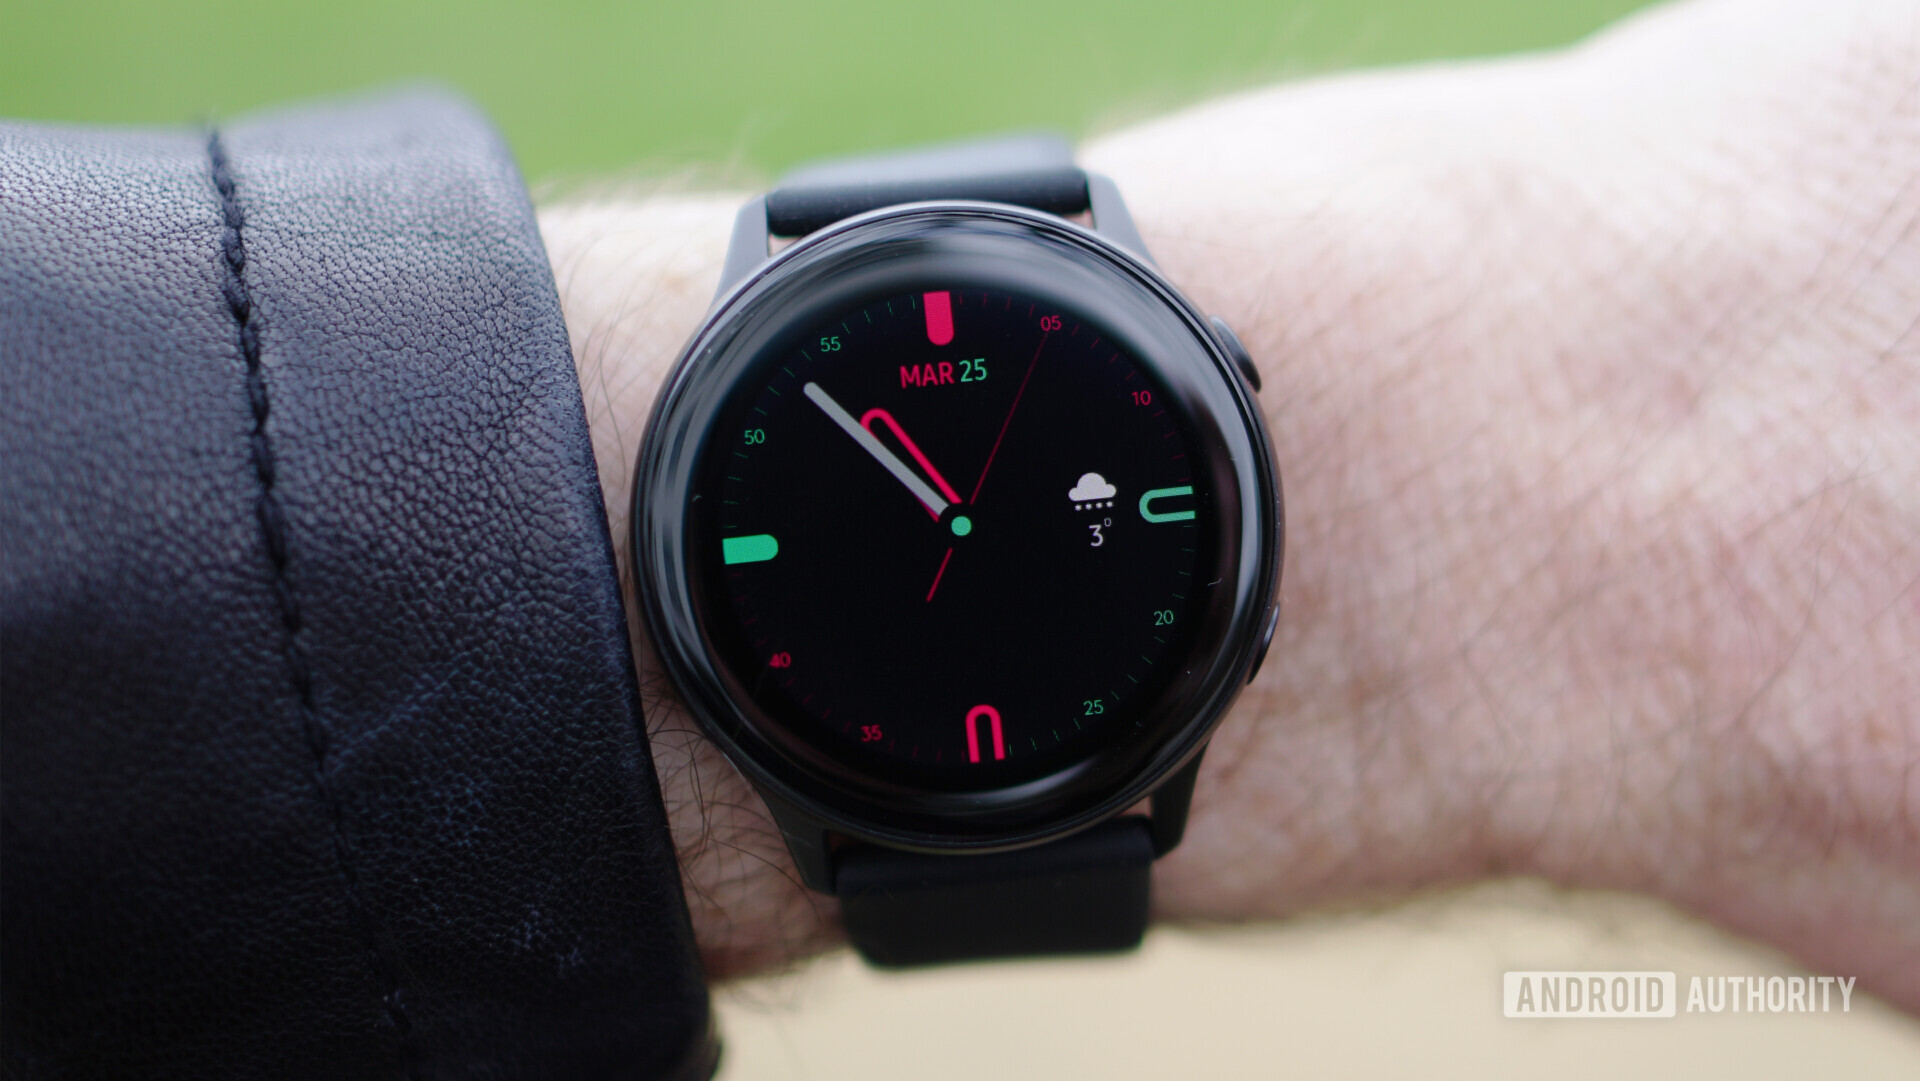 Samsung Galaxy Watch Active in the list of fitness tracker deals